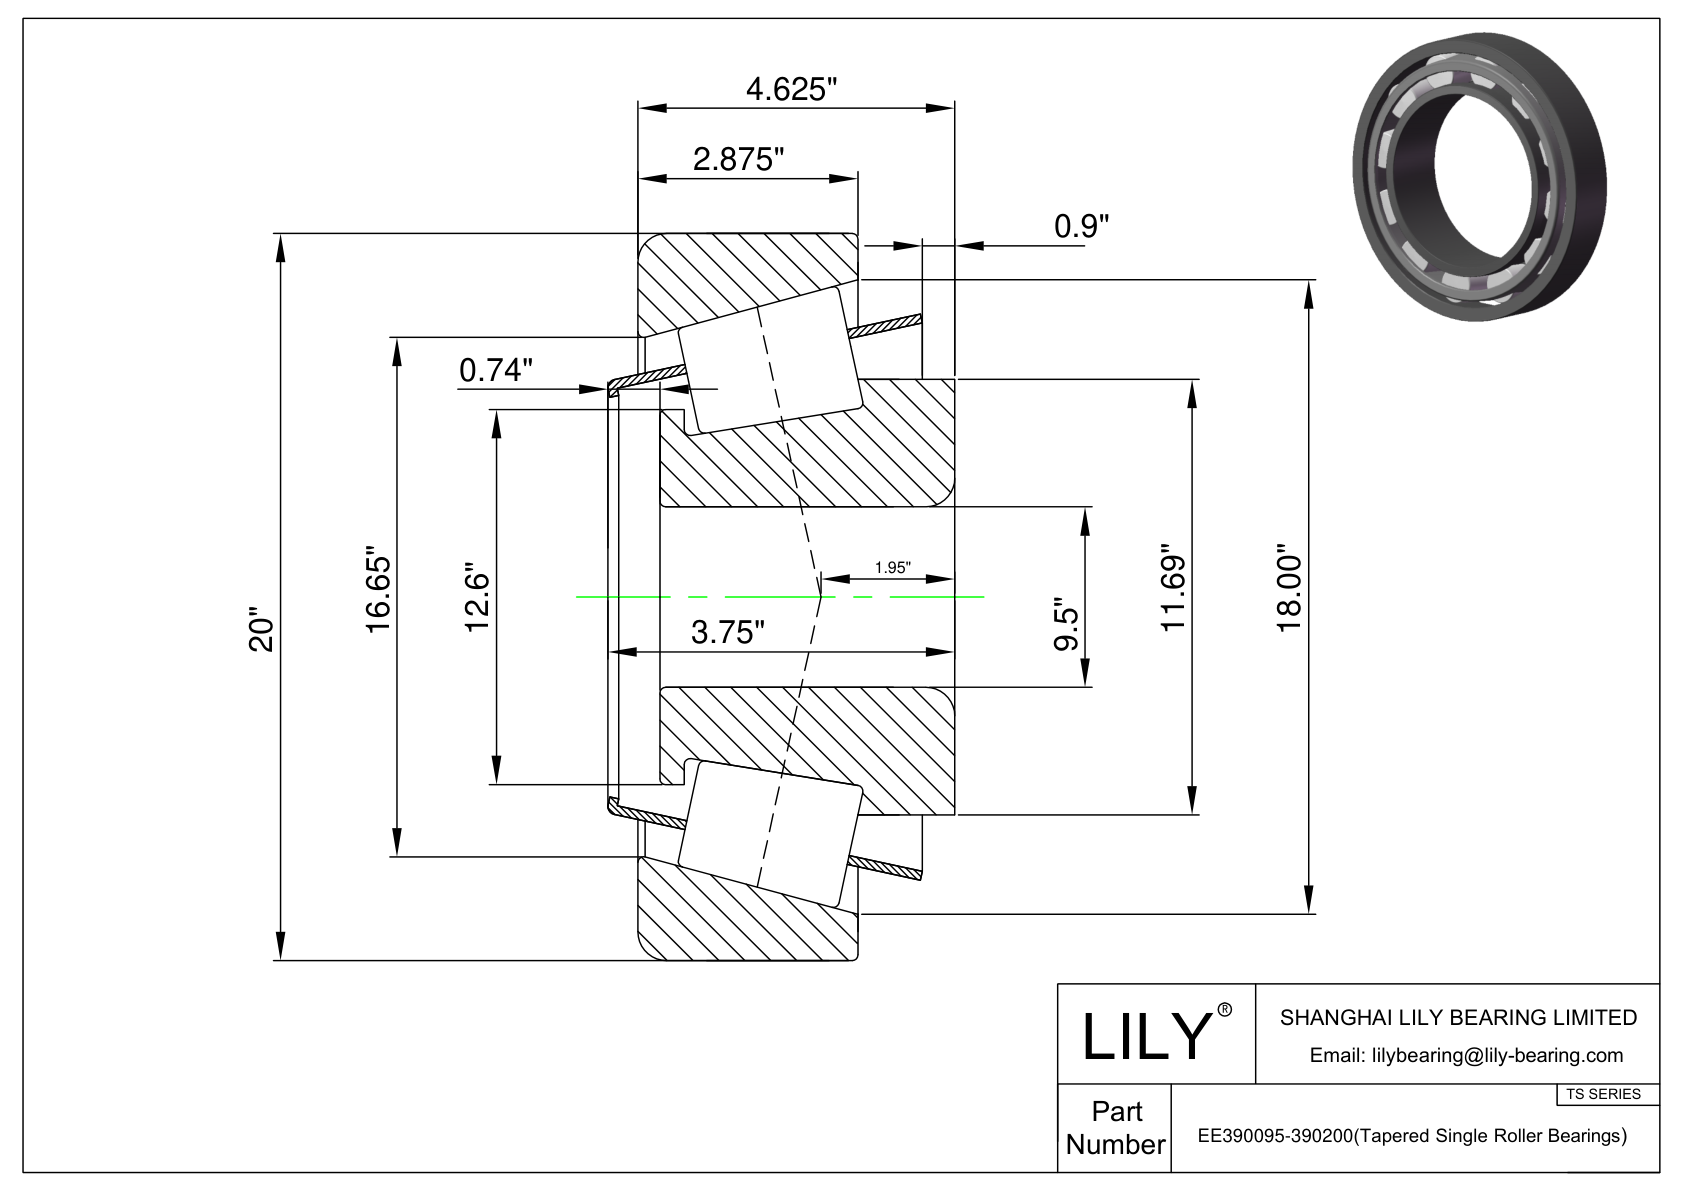 EE390095-390200 TS (Tapered Single Roller Bearings) (Imperial) cad drawing